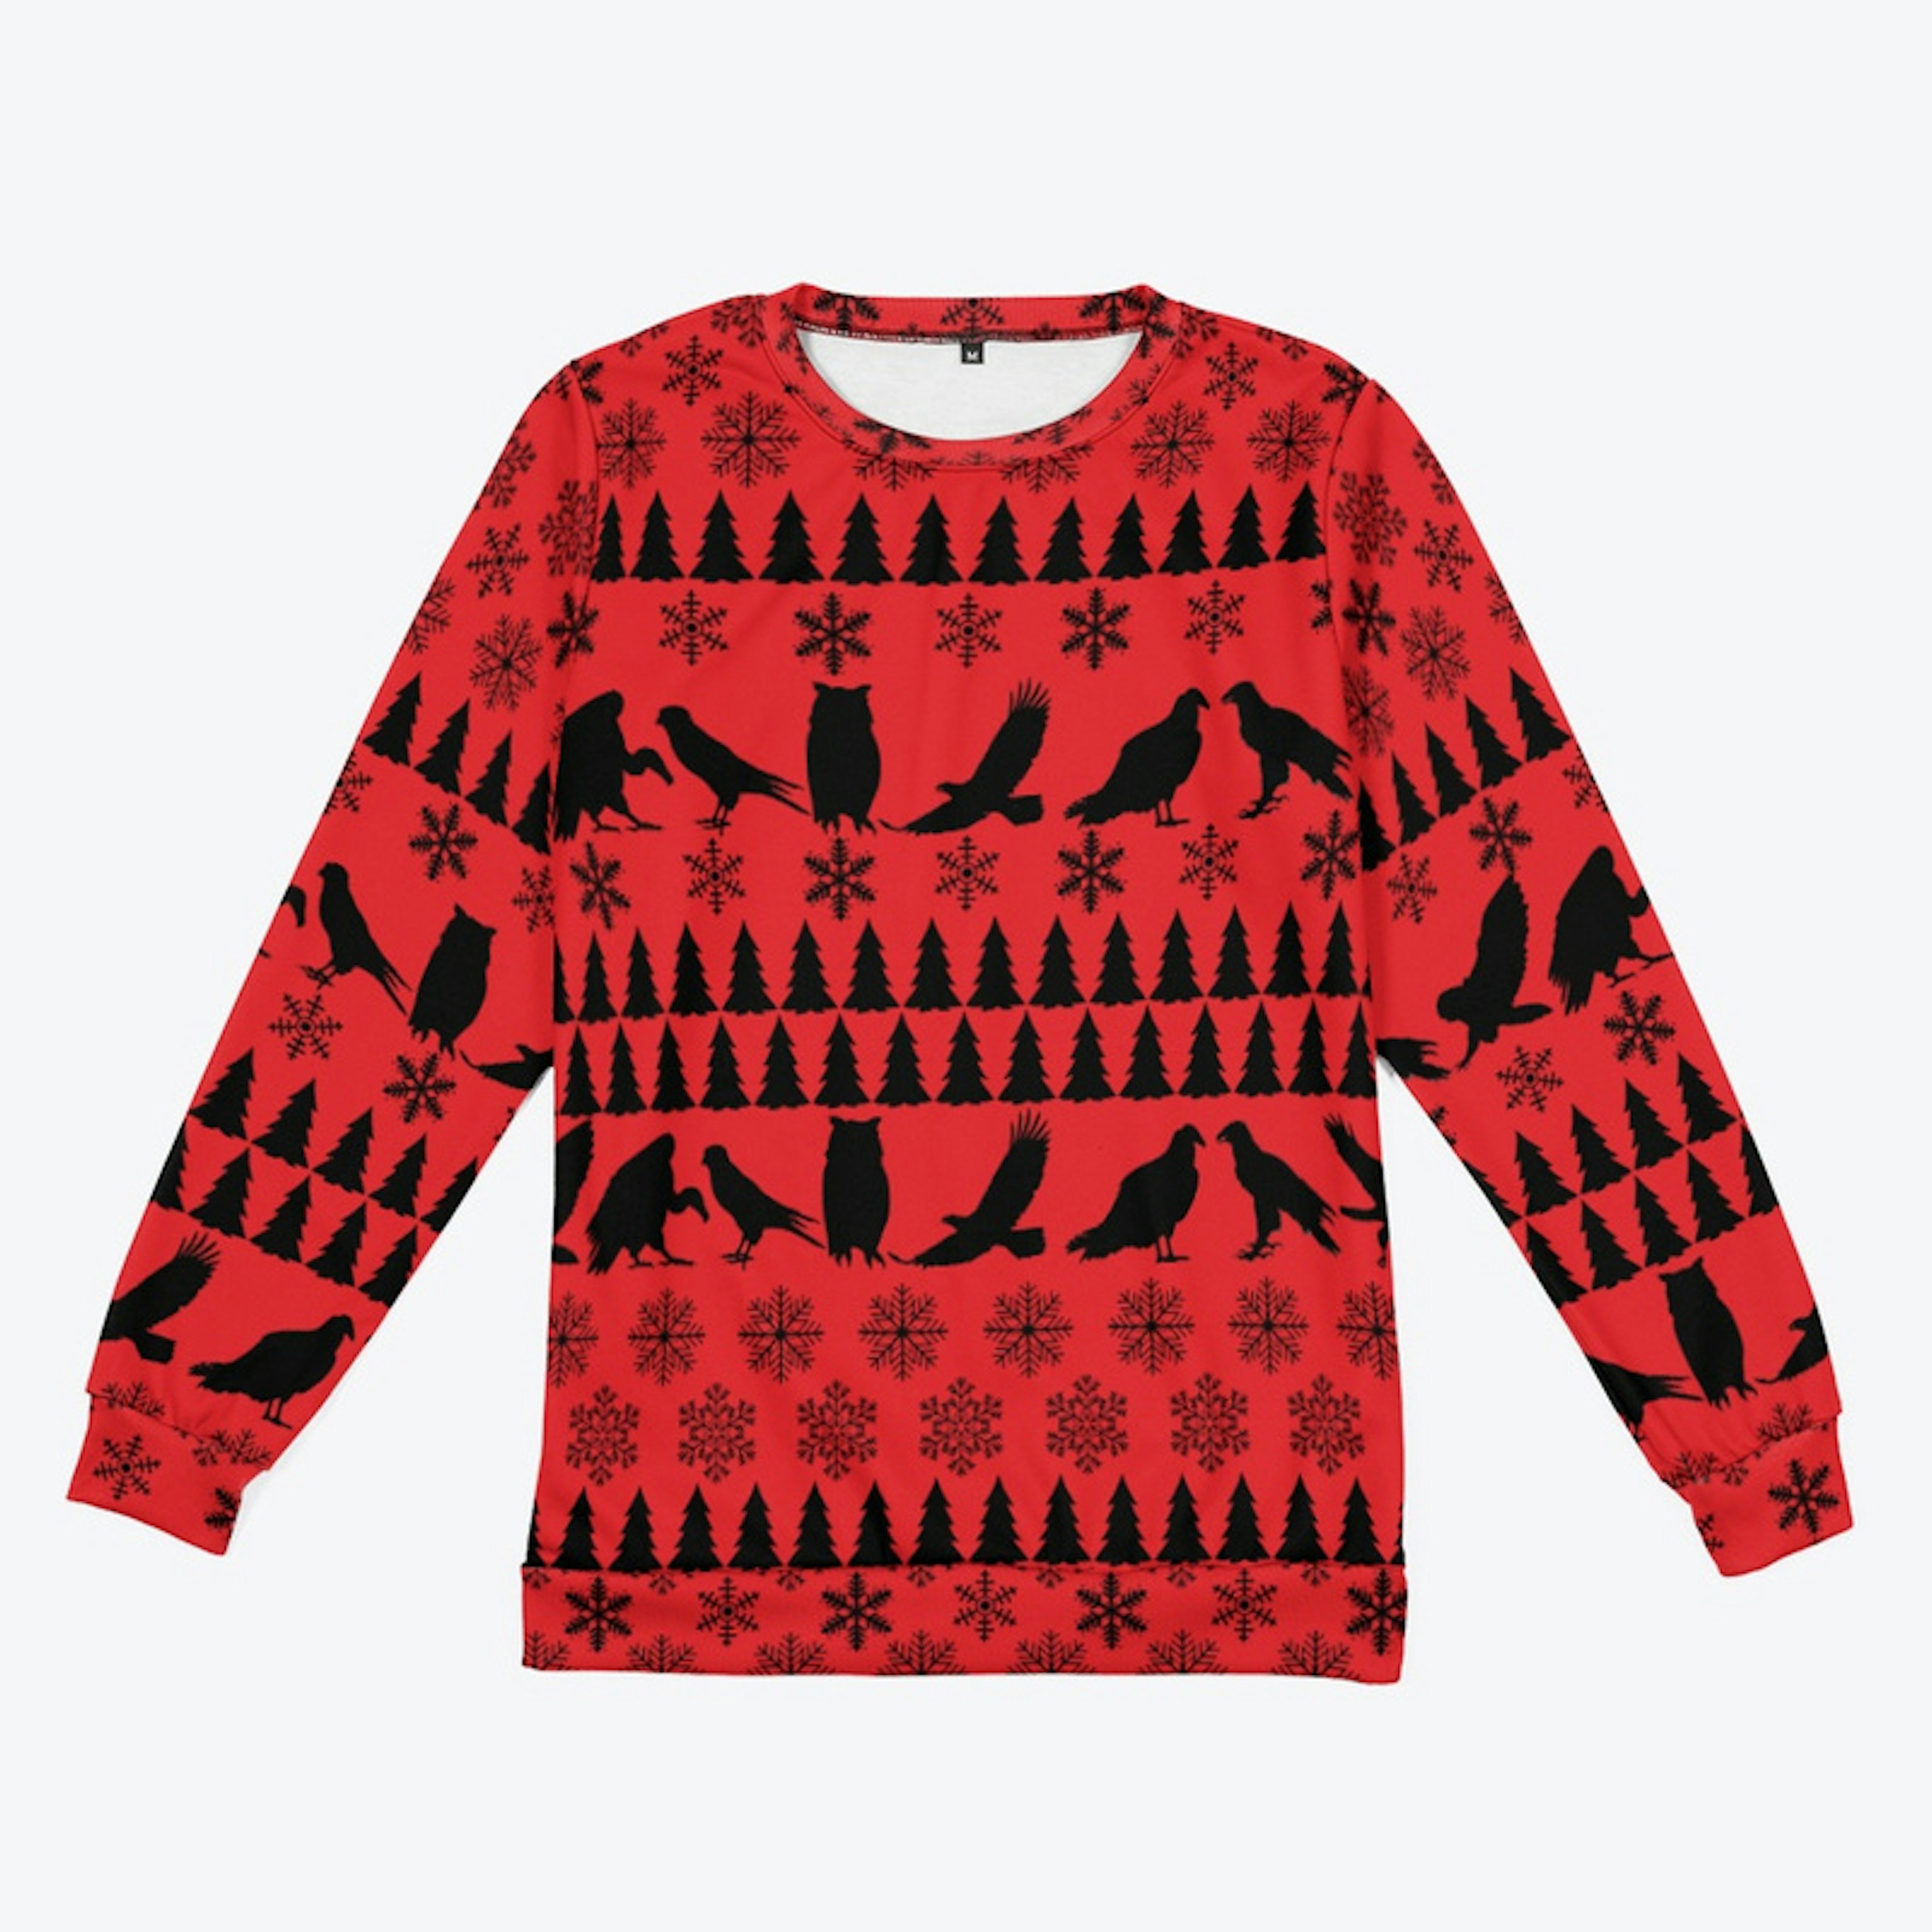 NOT Ugly Christmas Sweater